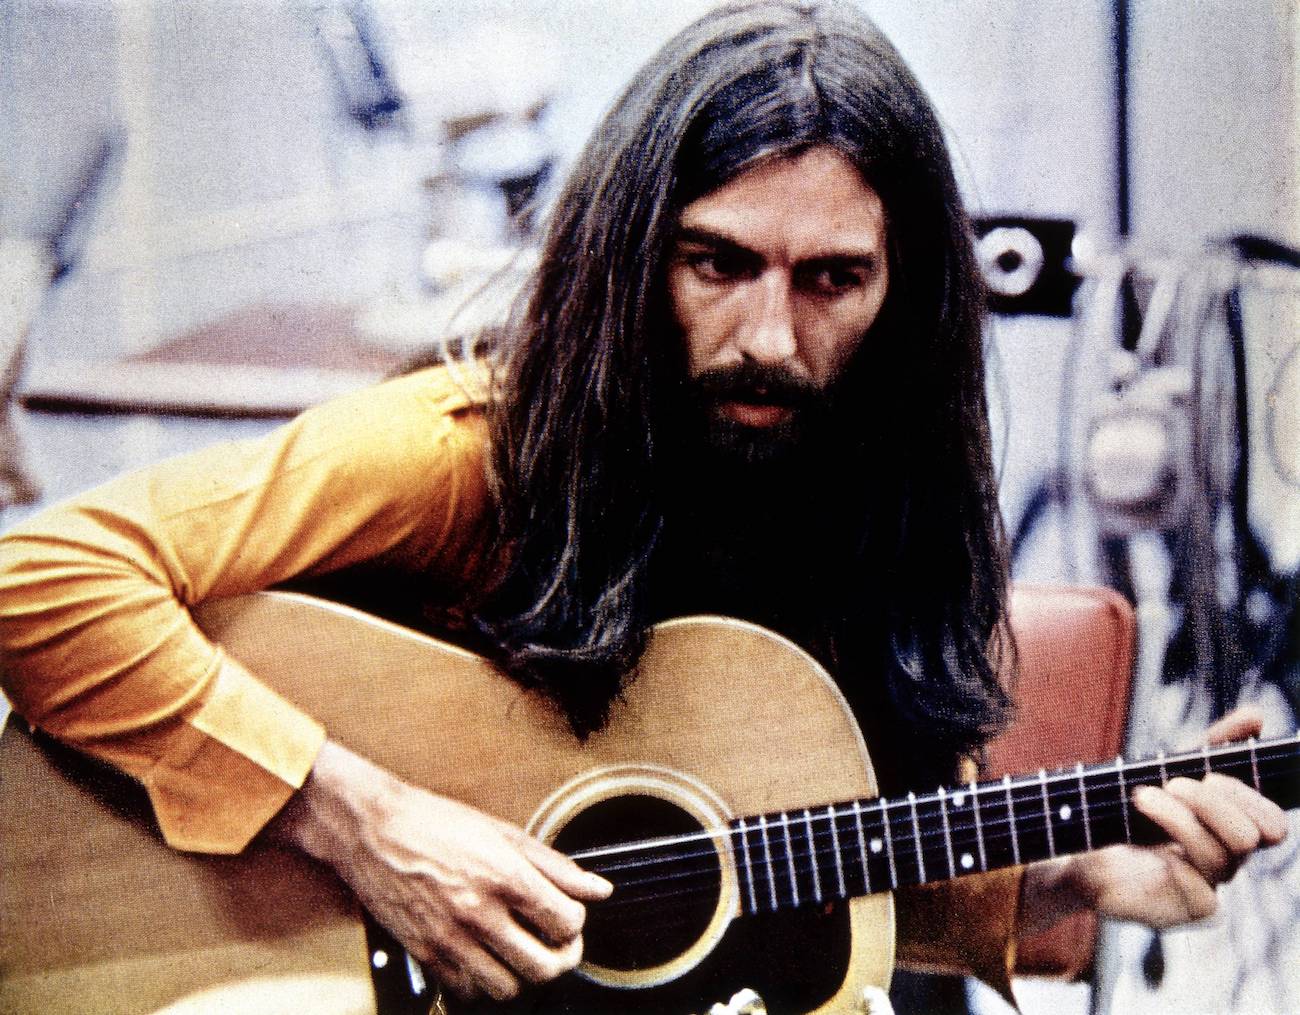 George Harrison playing guitar in 1970.